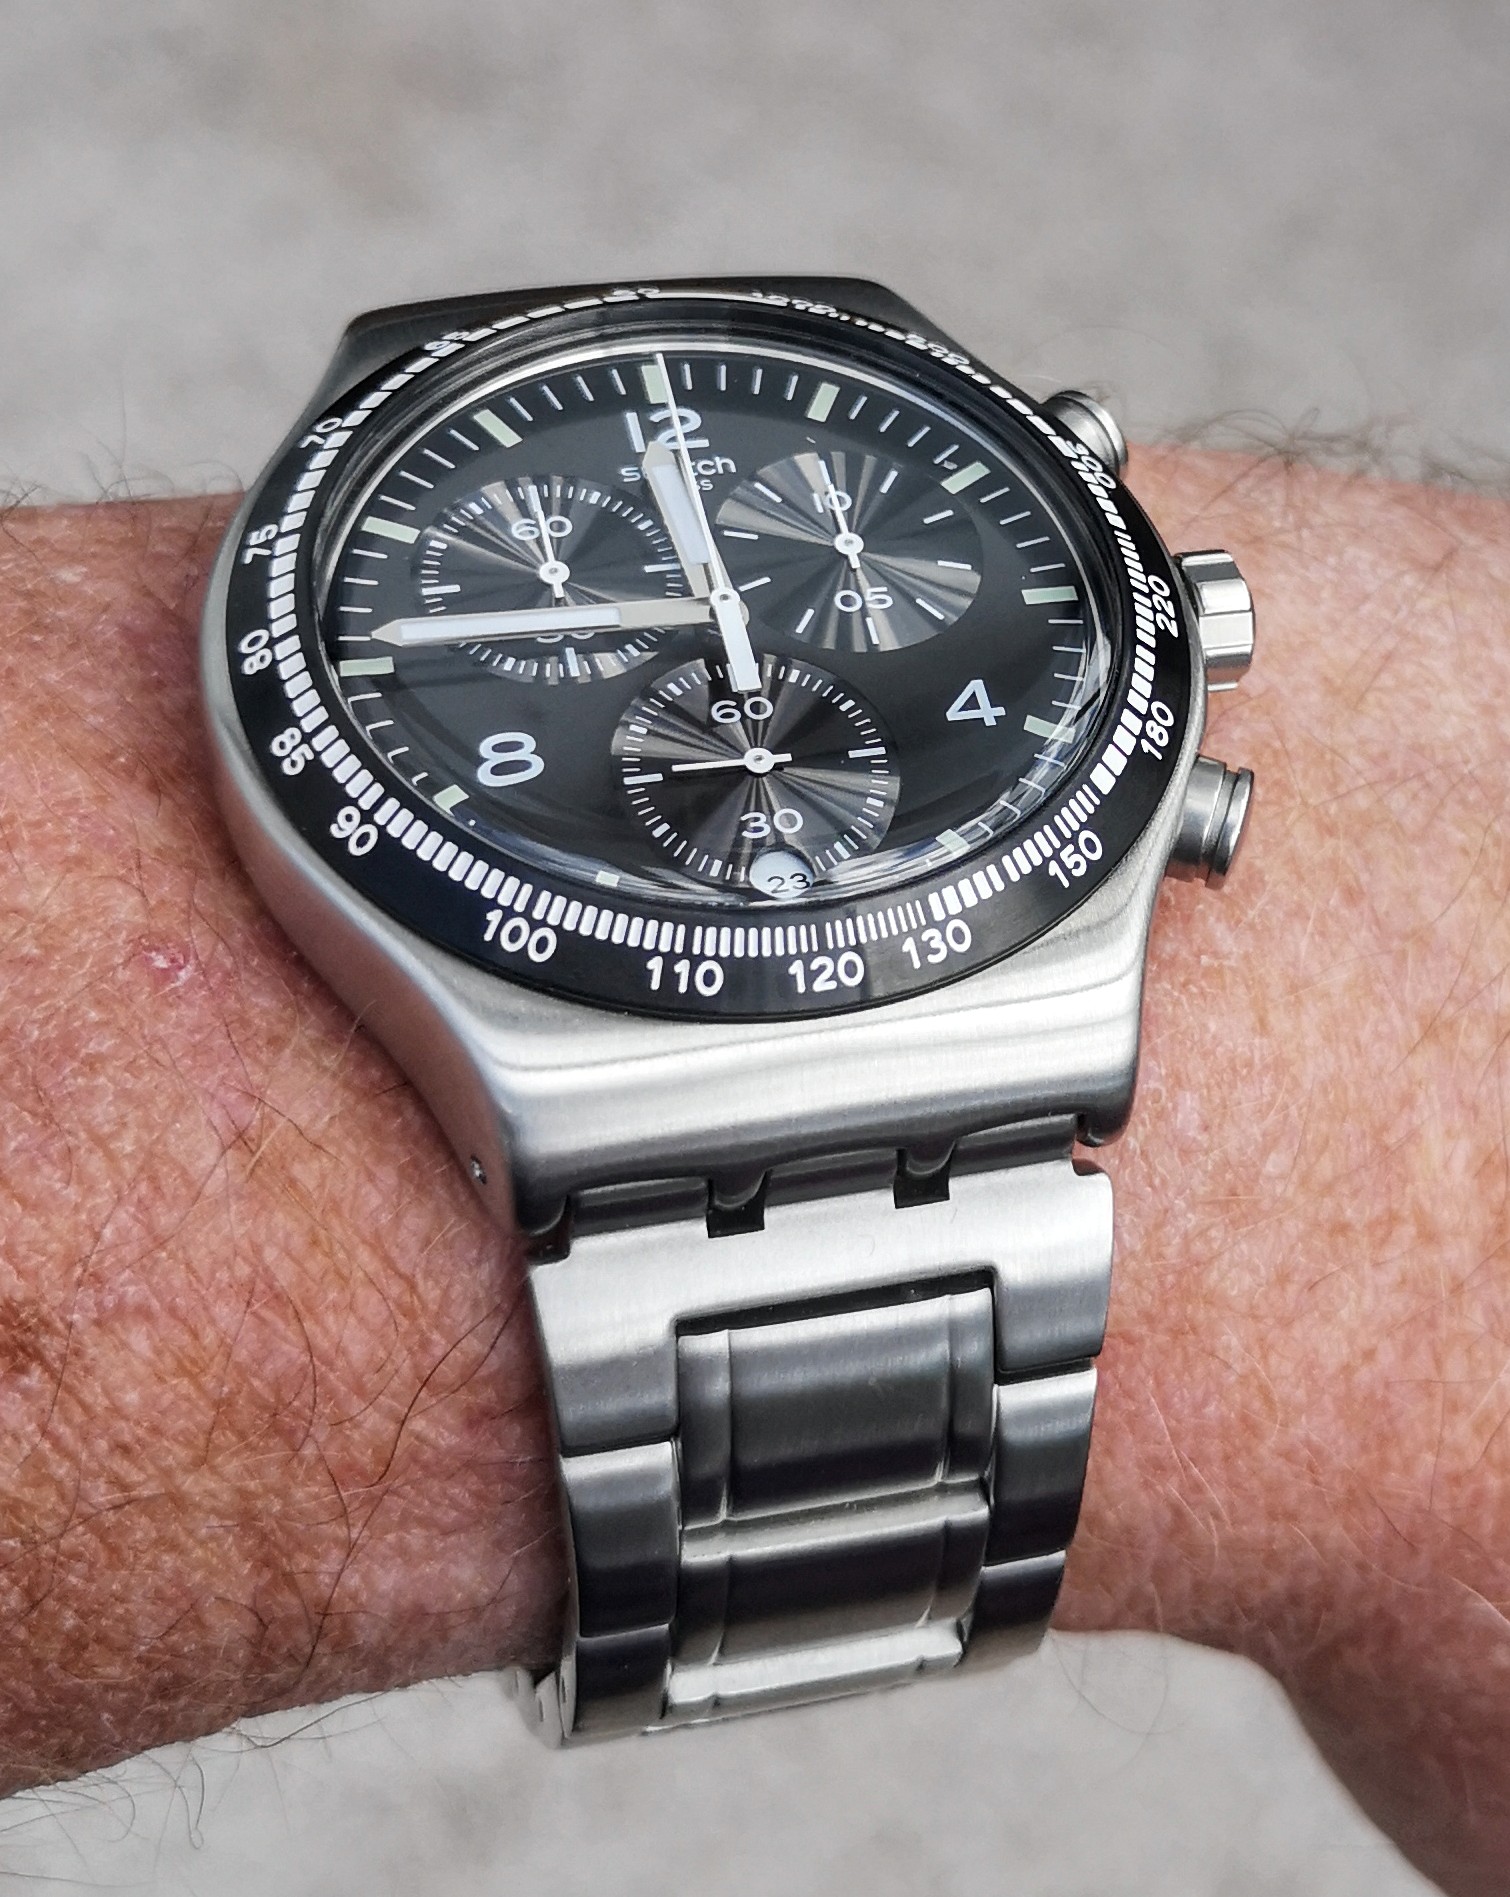 Chronograph for £150? - Page 2 - Watches - PistonHeads